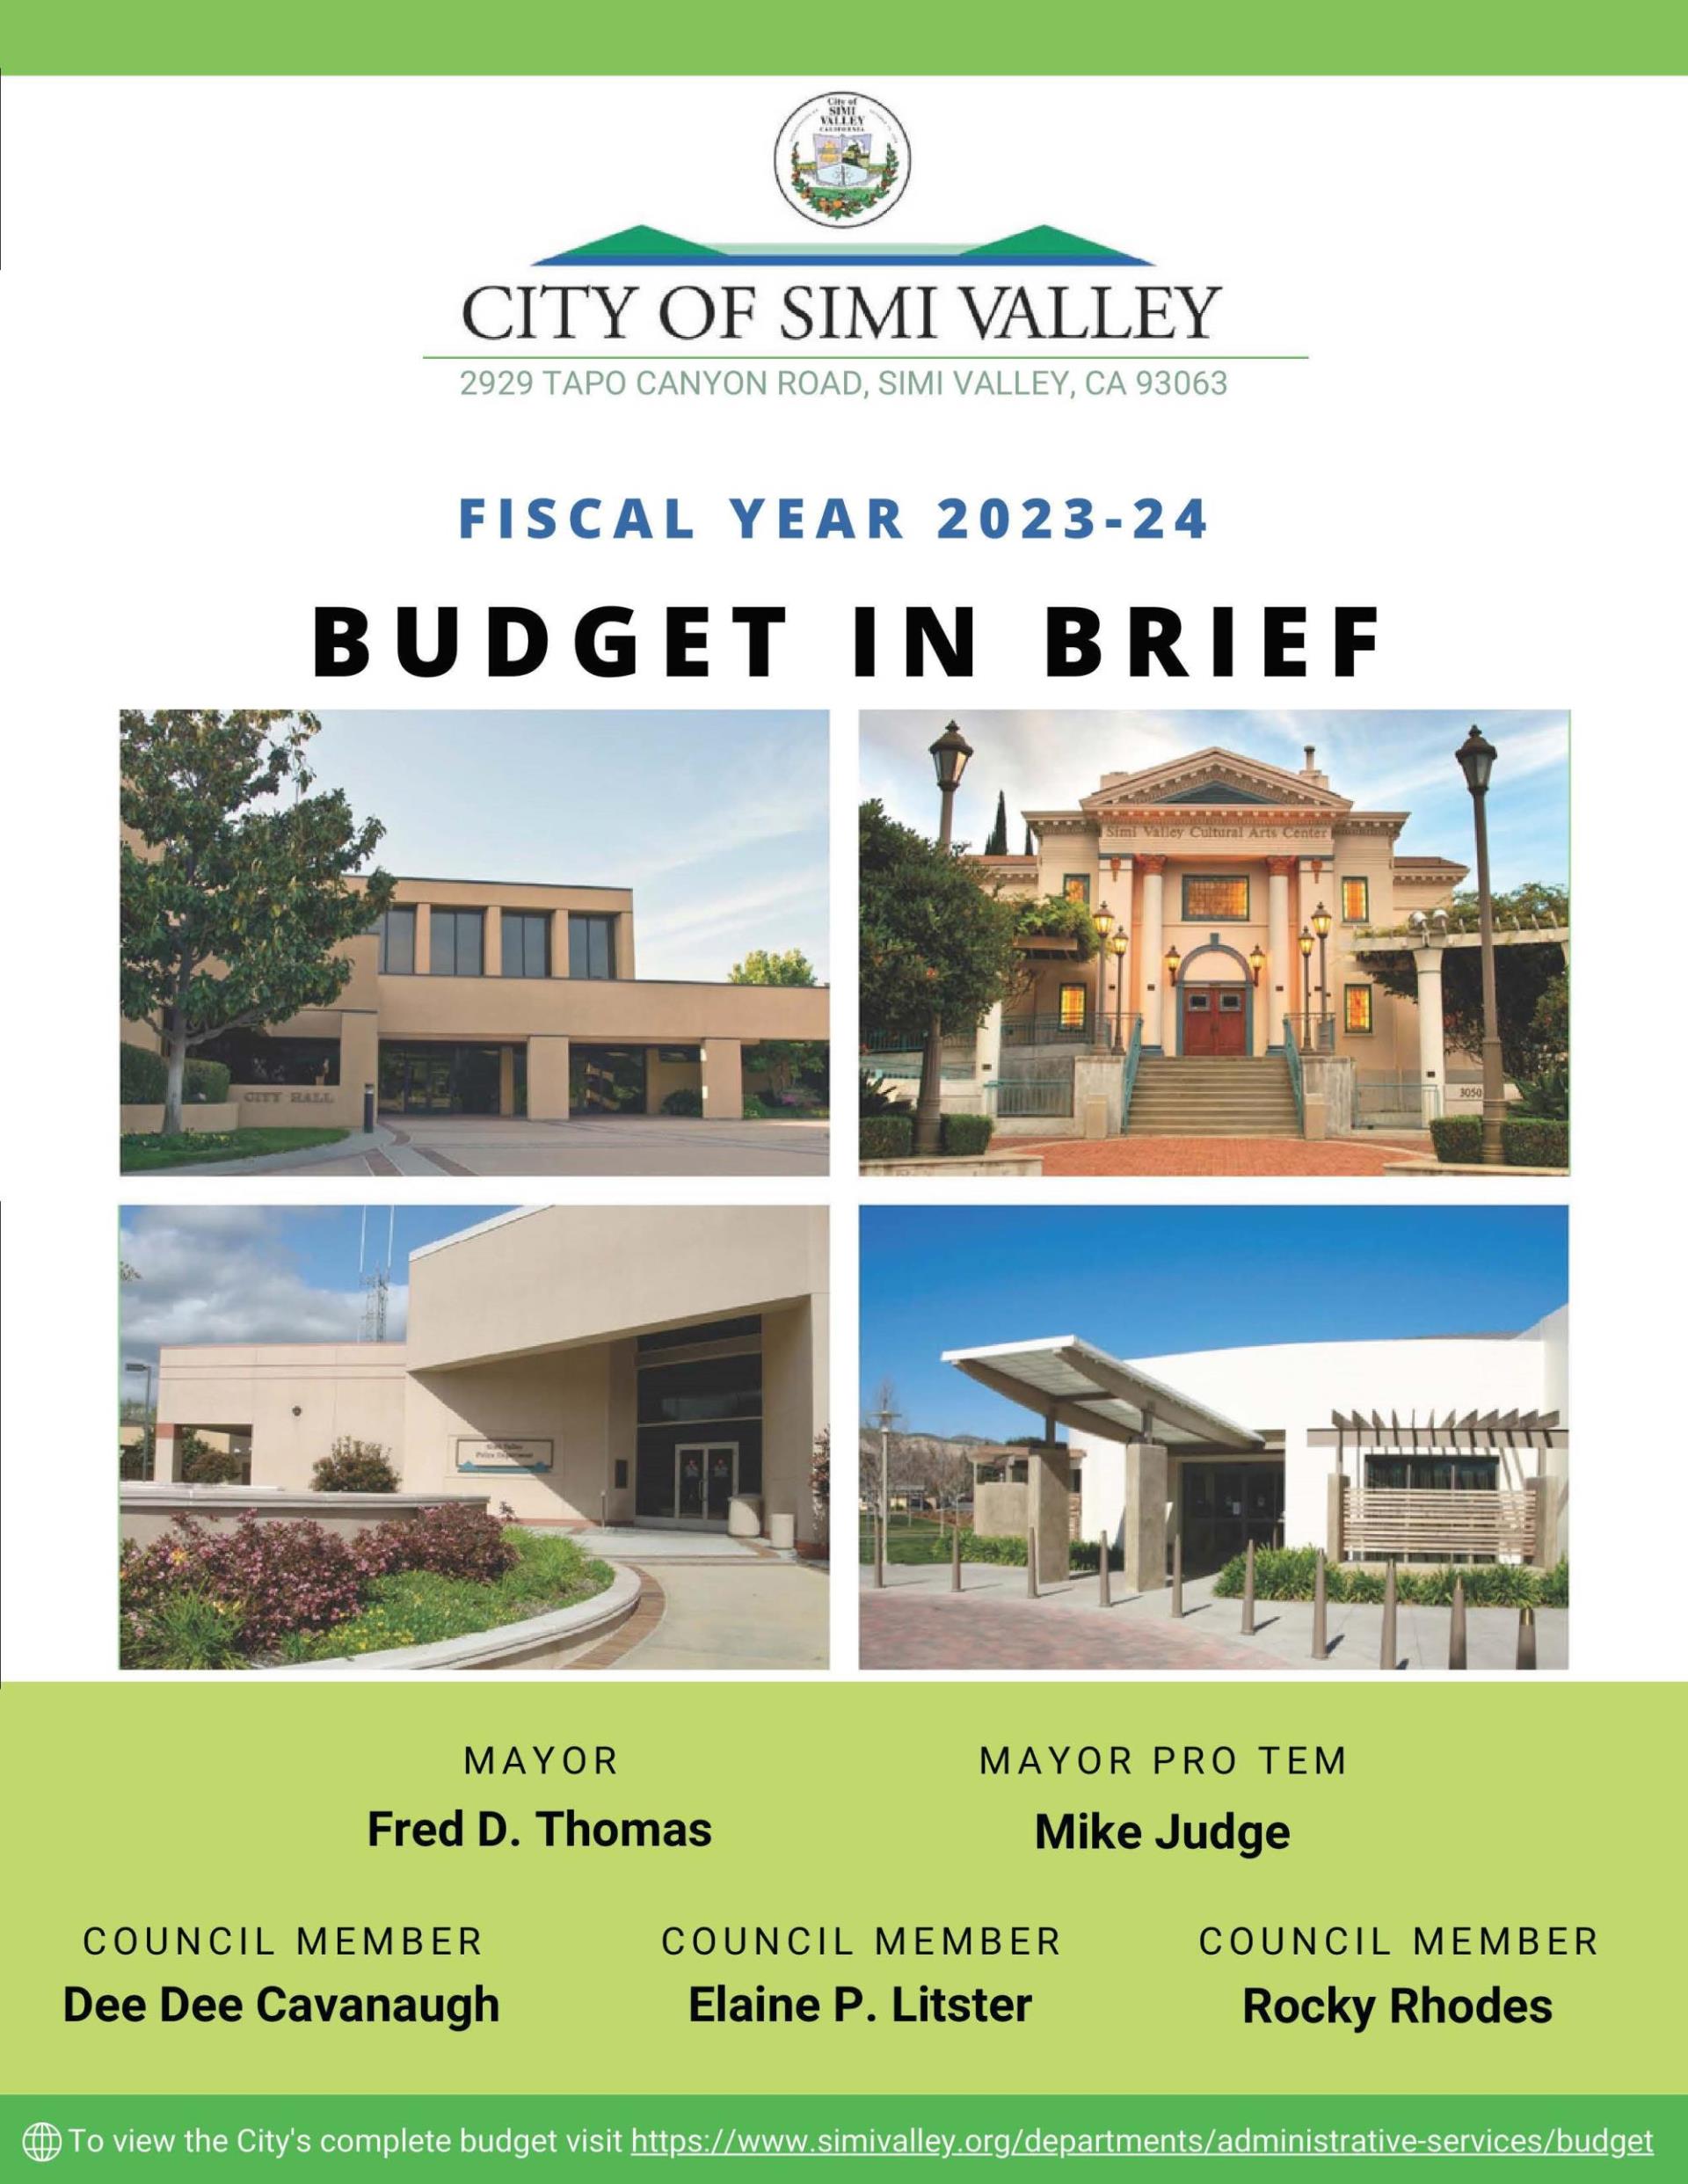 City of Simi Valley Fiscal Year 2023-24 Budget in Brief Cover Page Mayor Fred D. Thomas, Mayor Pro Tem Mike Judge, Council Member Dee Dee Cavanaugh, Council Member Elaine P. Litster, Council Member Rocky Rhodes